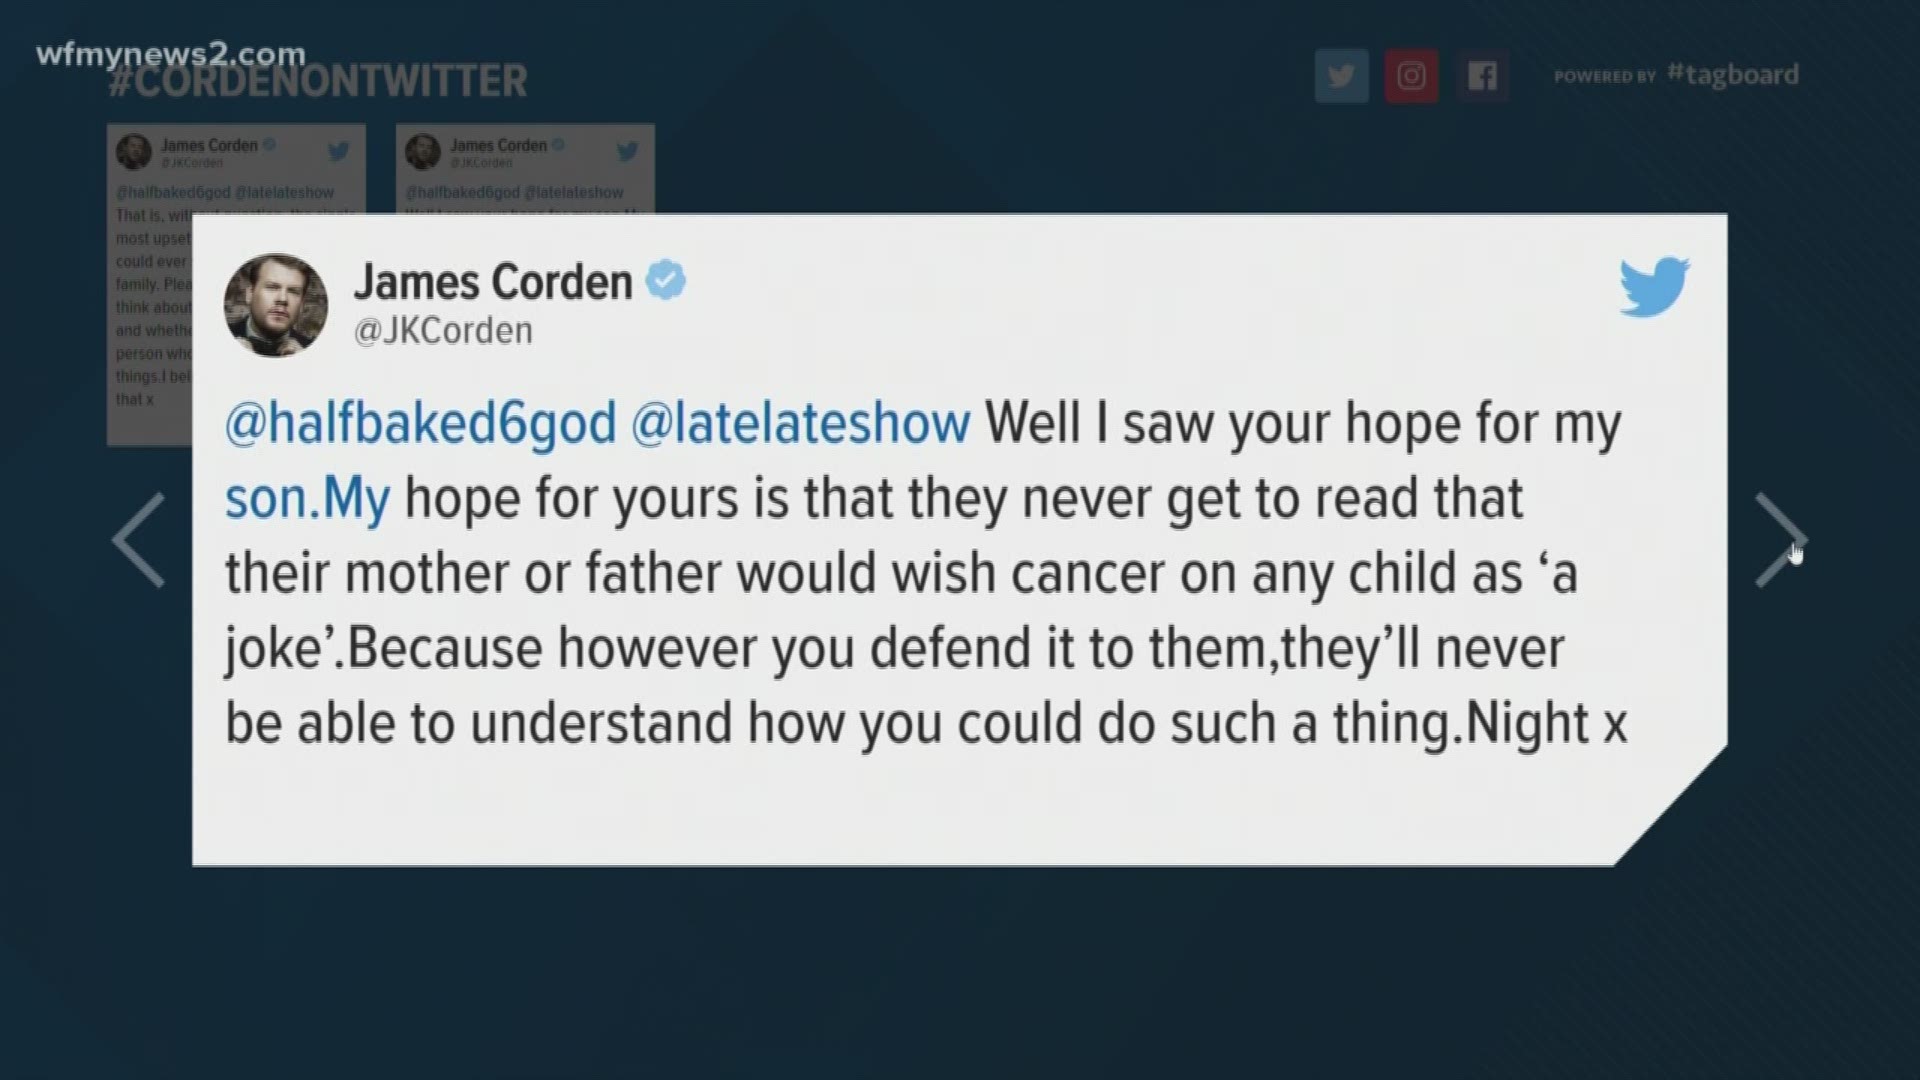 After potentially spoiling Game of Thrones, a Twitter user attacked Corden by going after his child